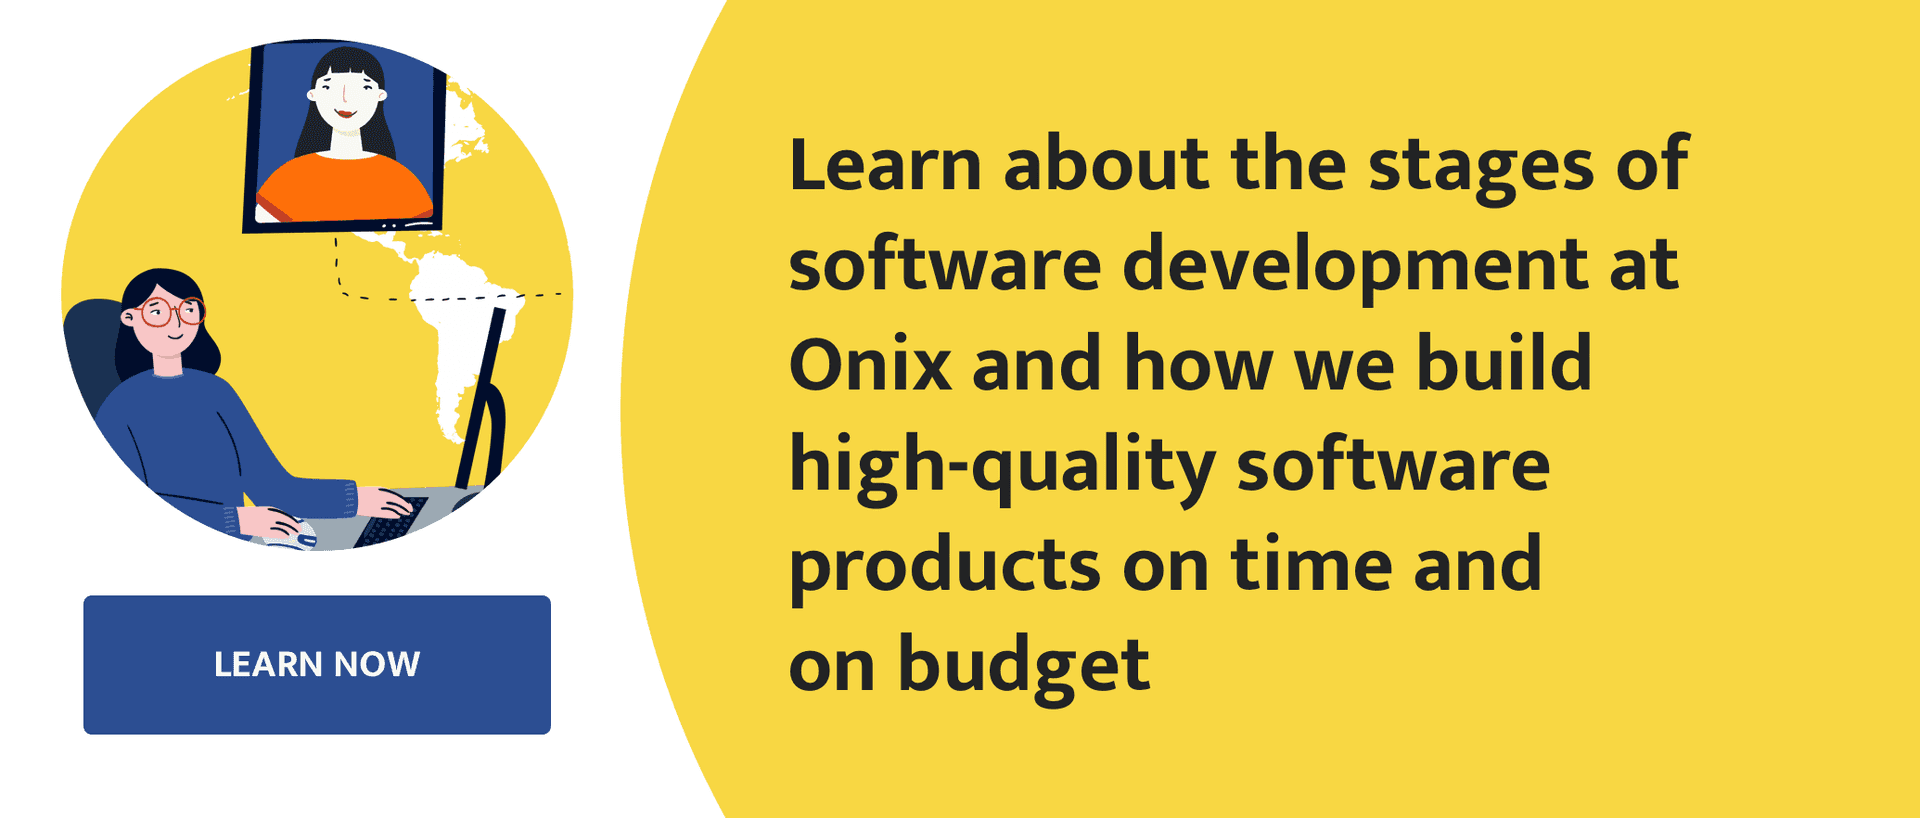 build high-quality software products